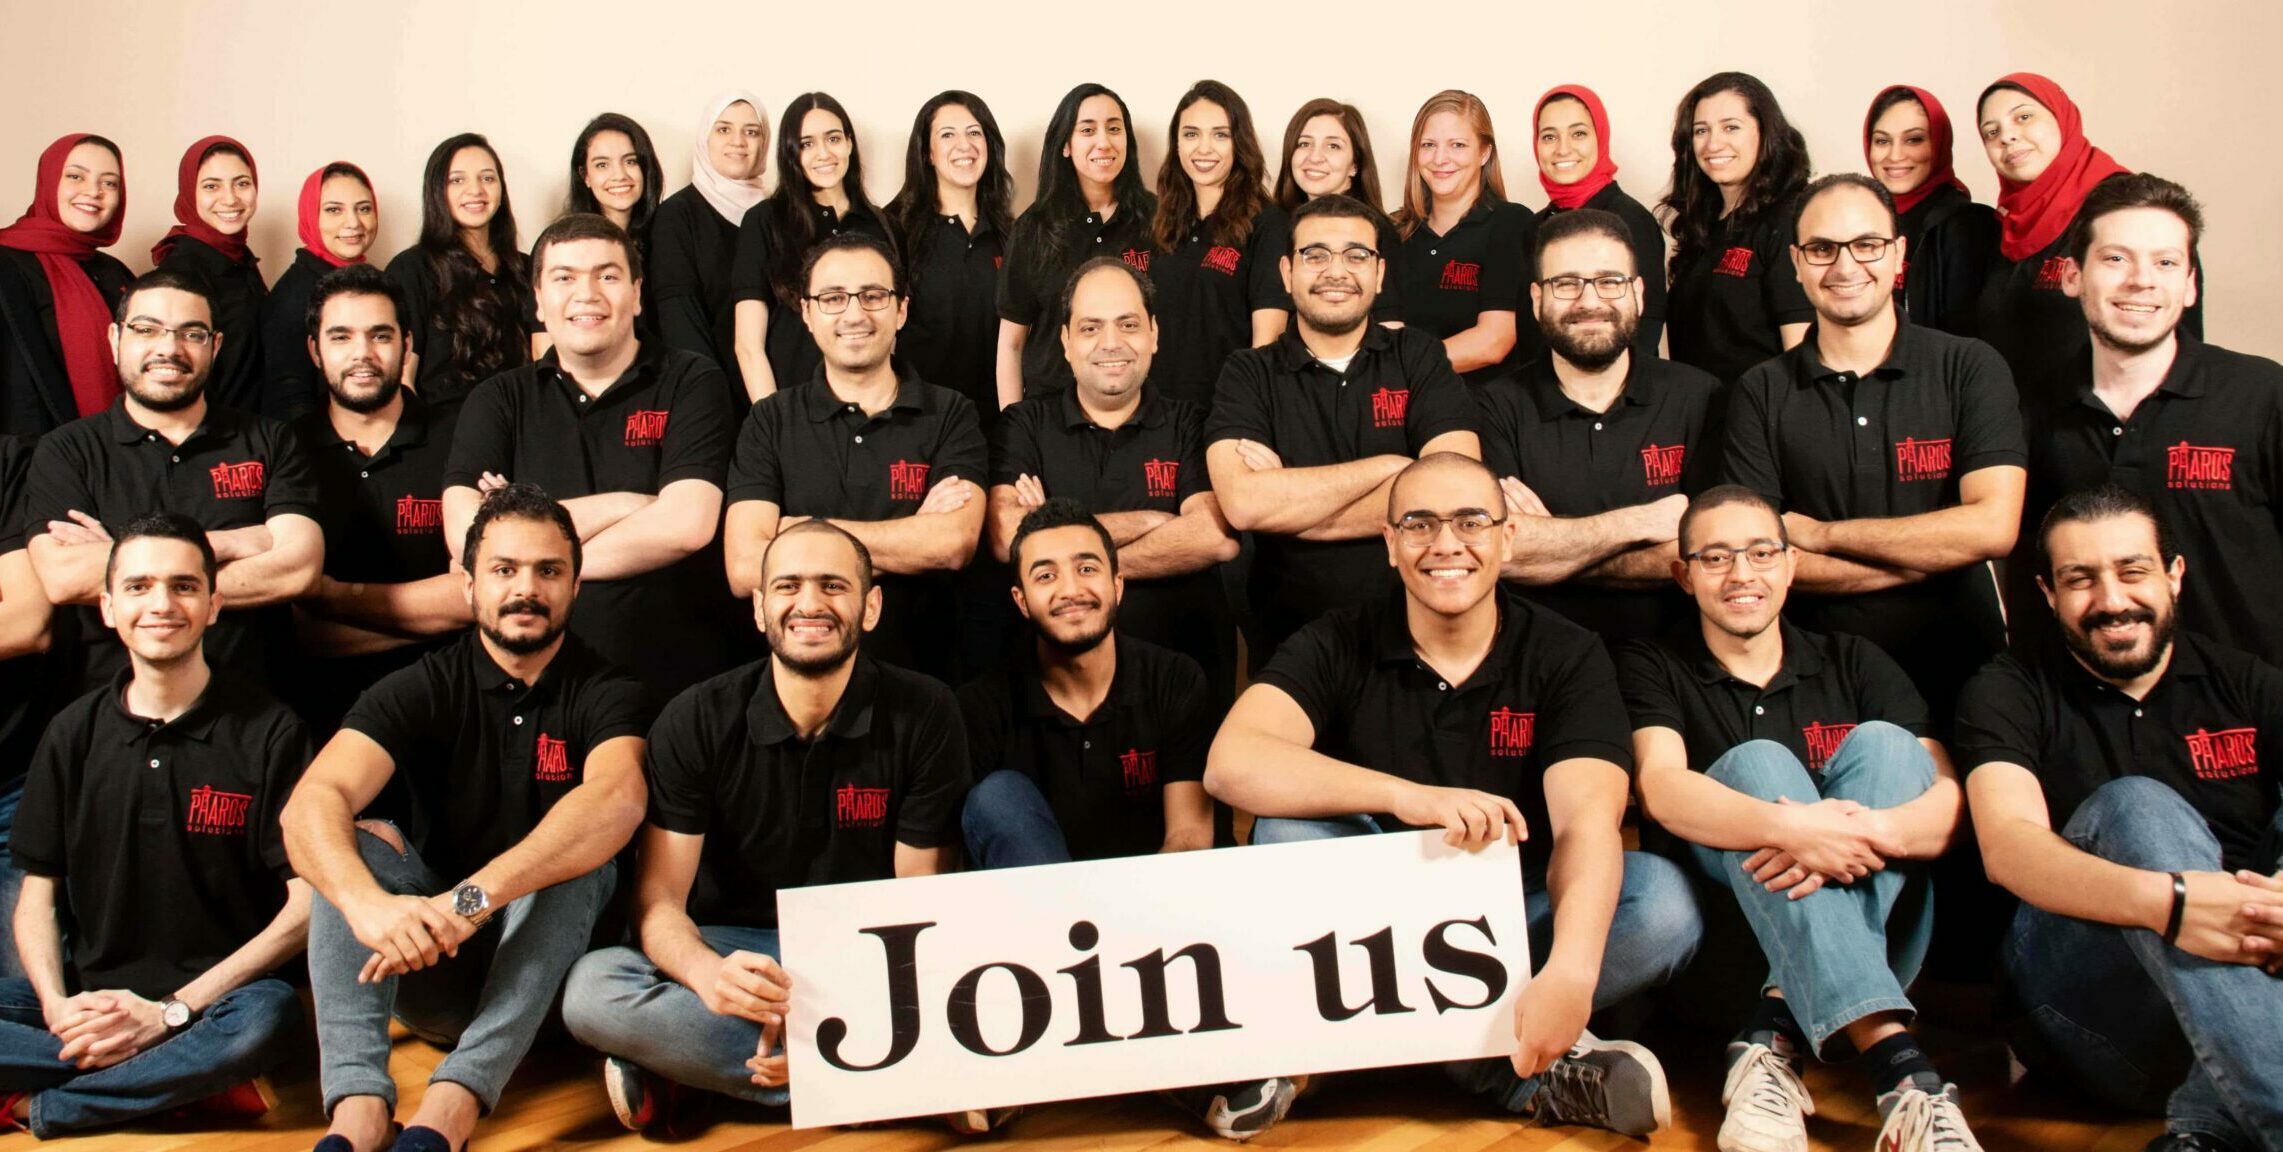 Team of software engineers working at Pharos Solutions holding a sign that says join us to work in a well-established software development company